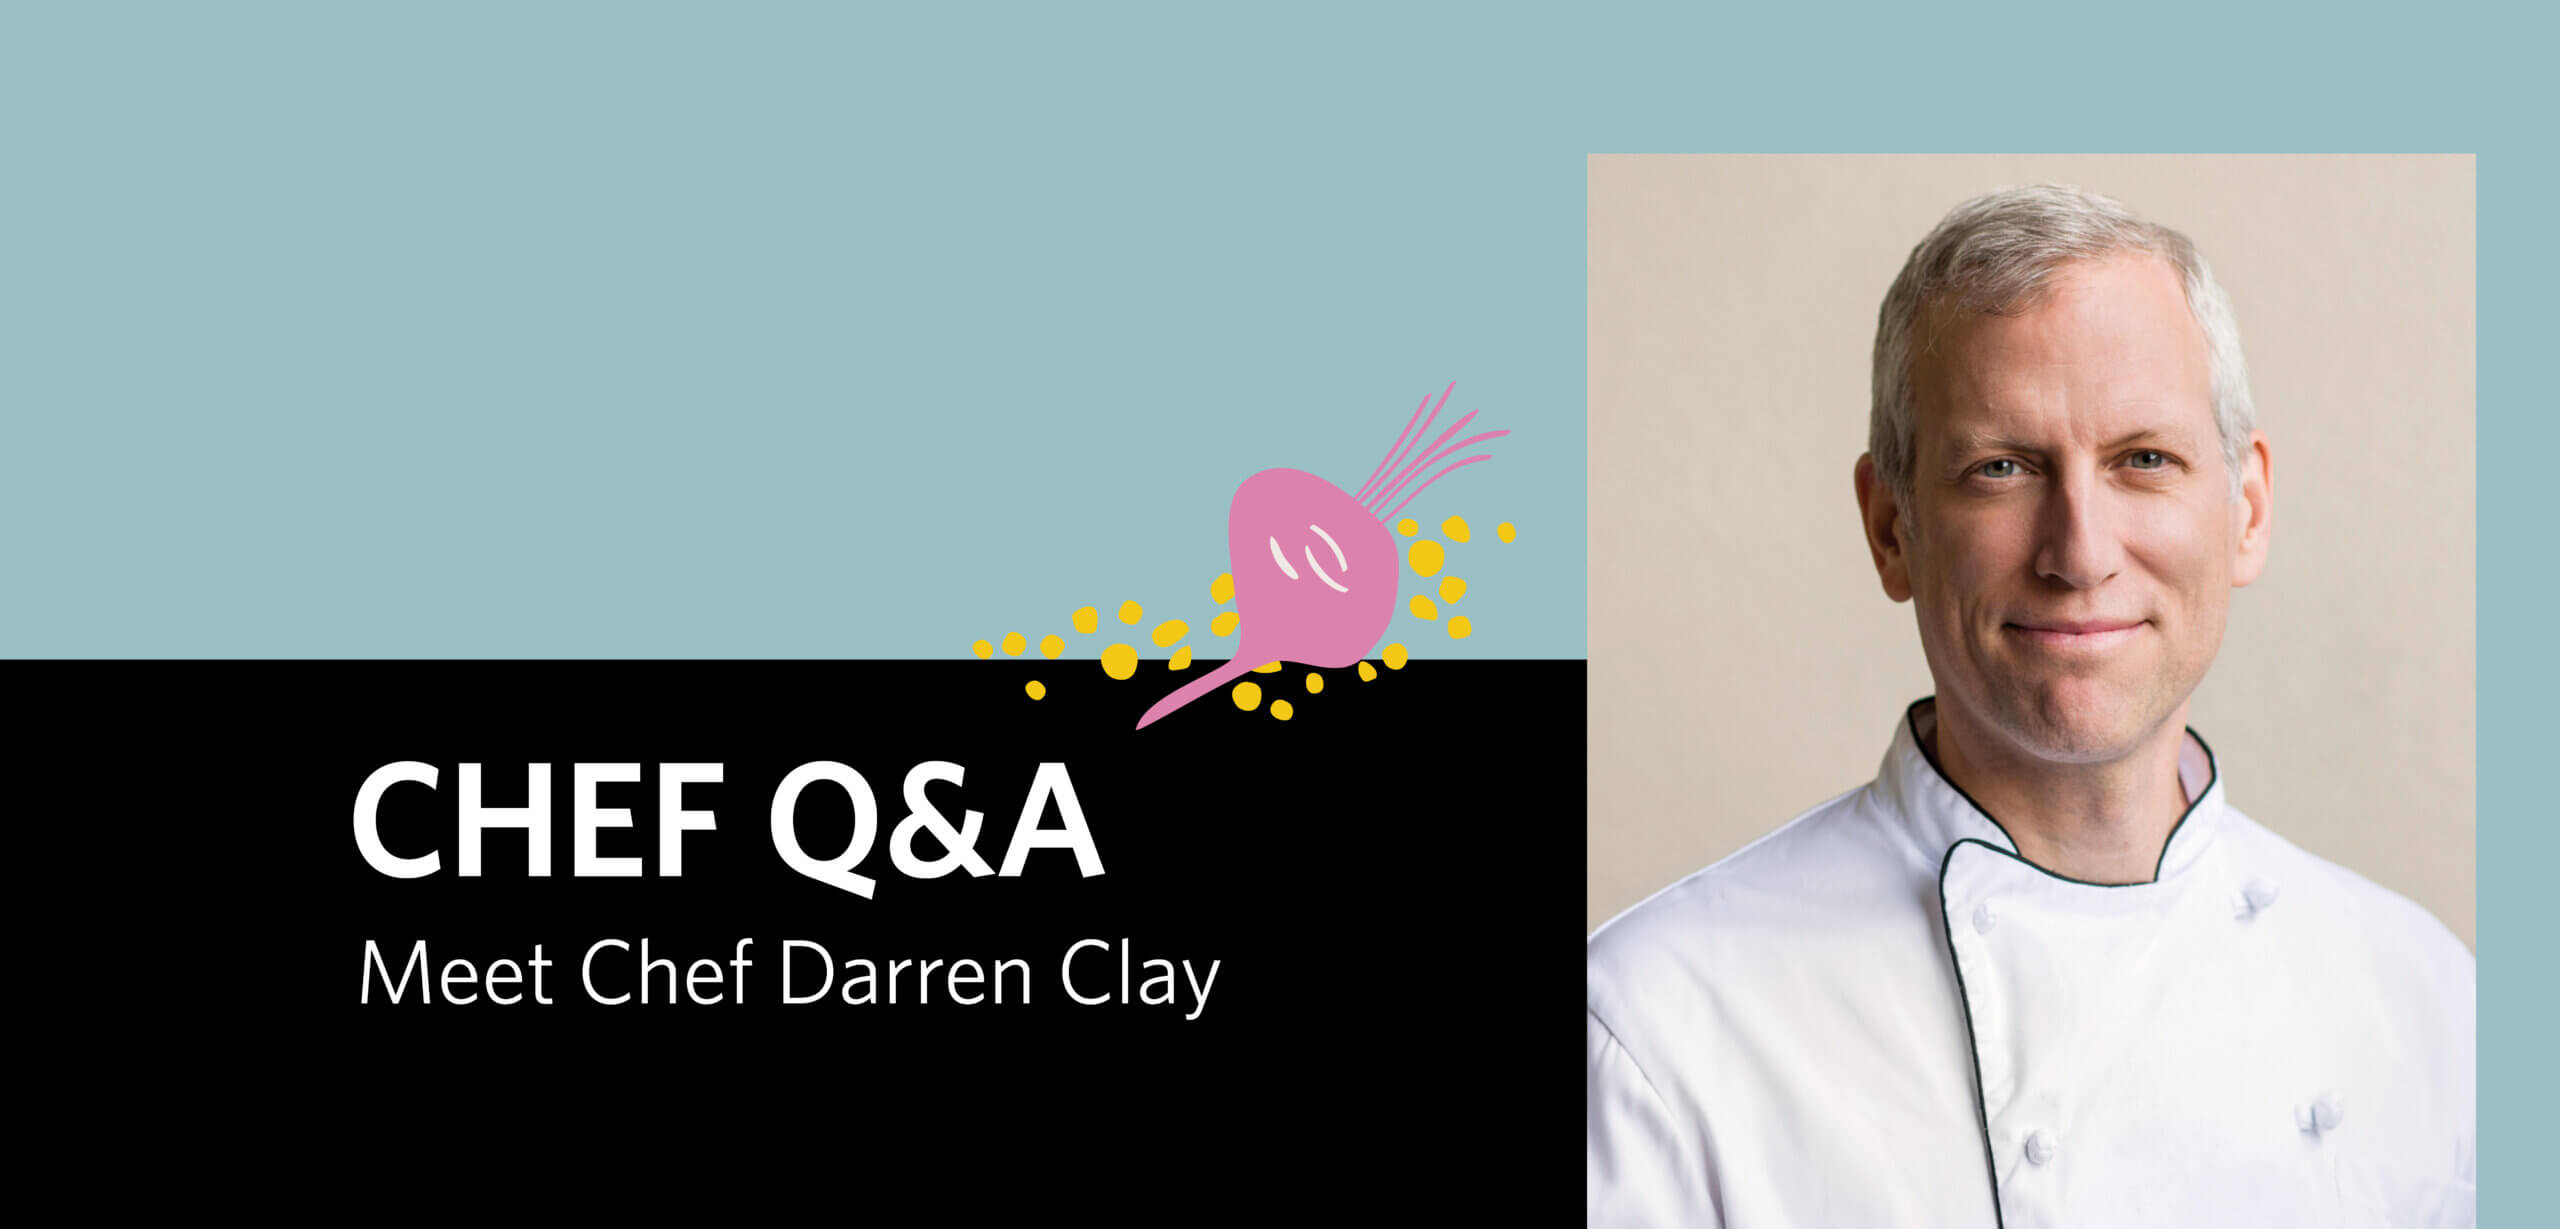 Image of Residence Dining Sous Chef Darren Clay beside the text "CHEF Q&A: Meet Chef Darren Clay" with an illustration of a beet.